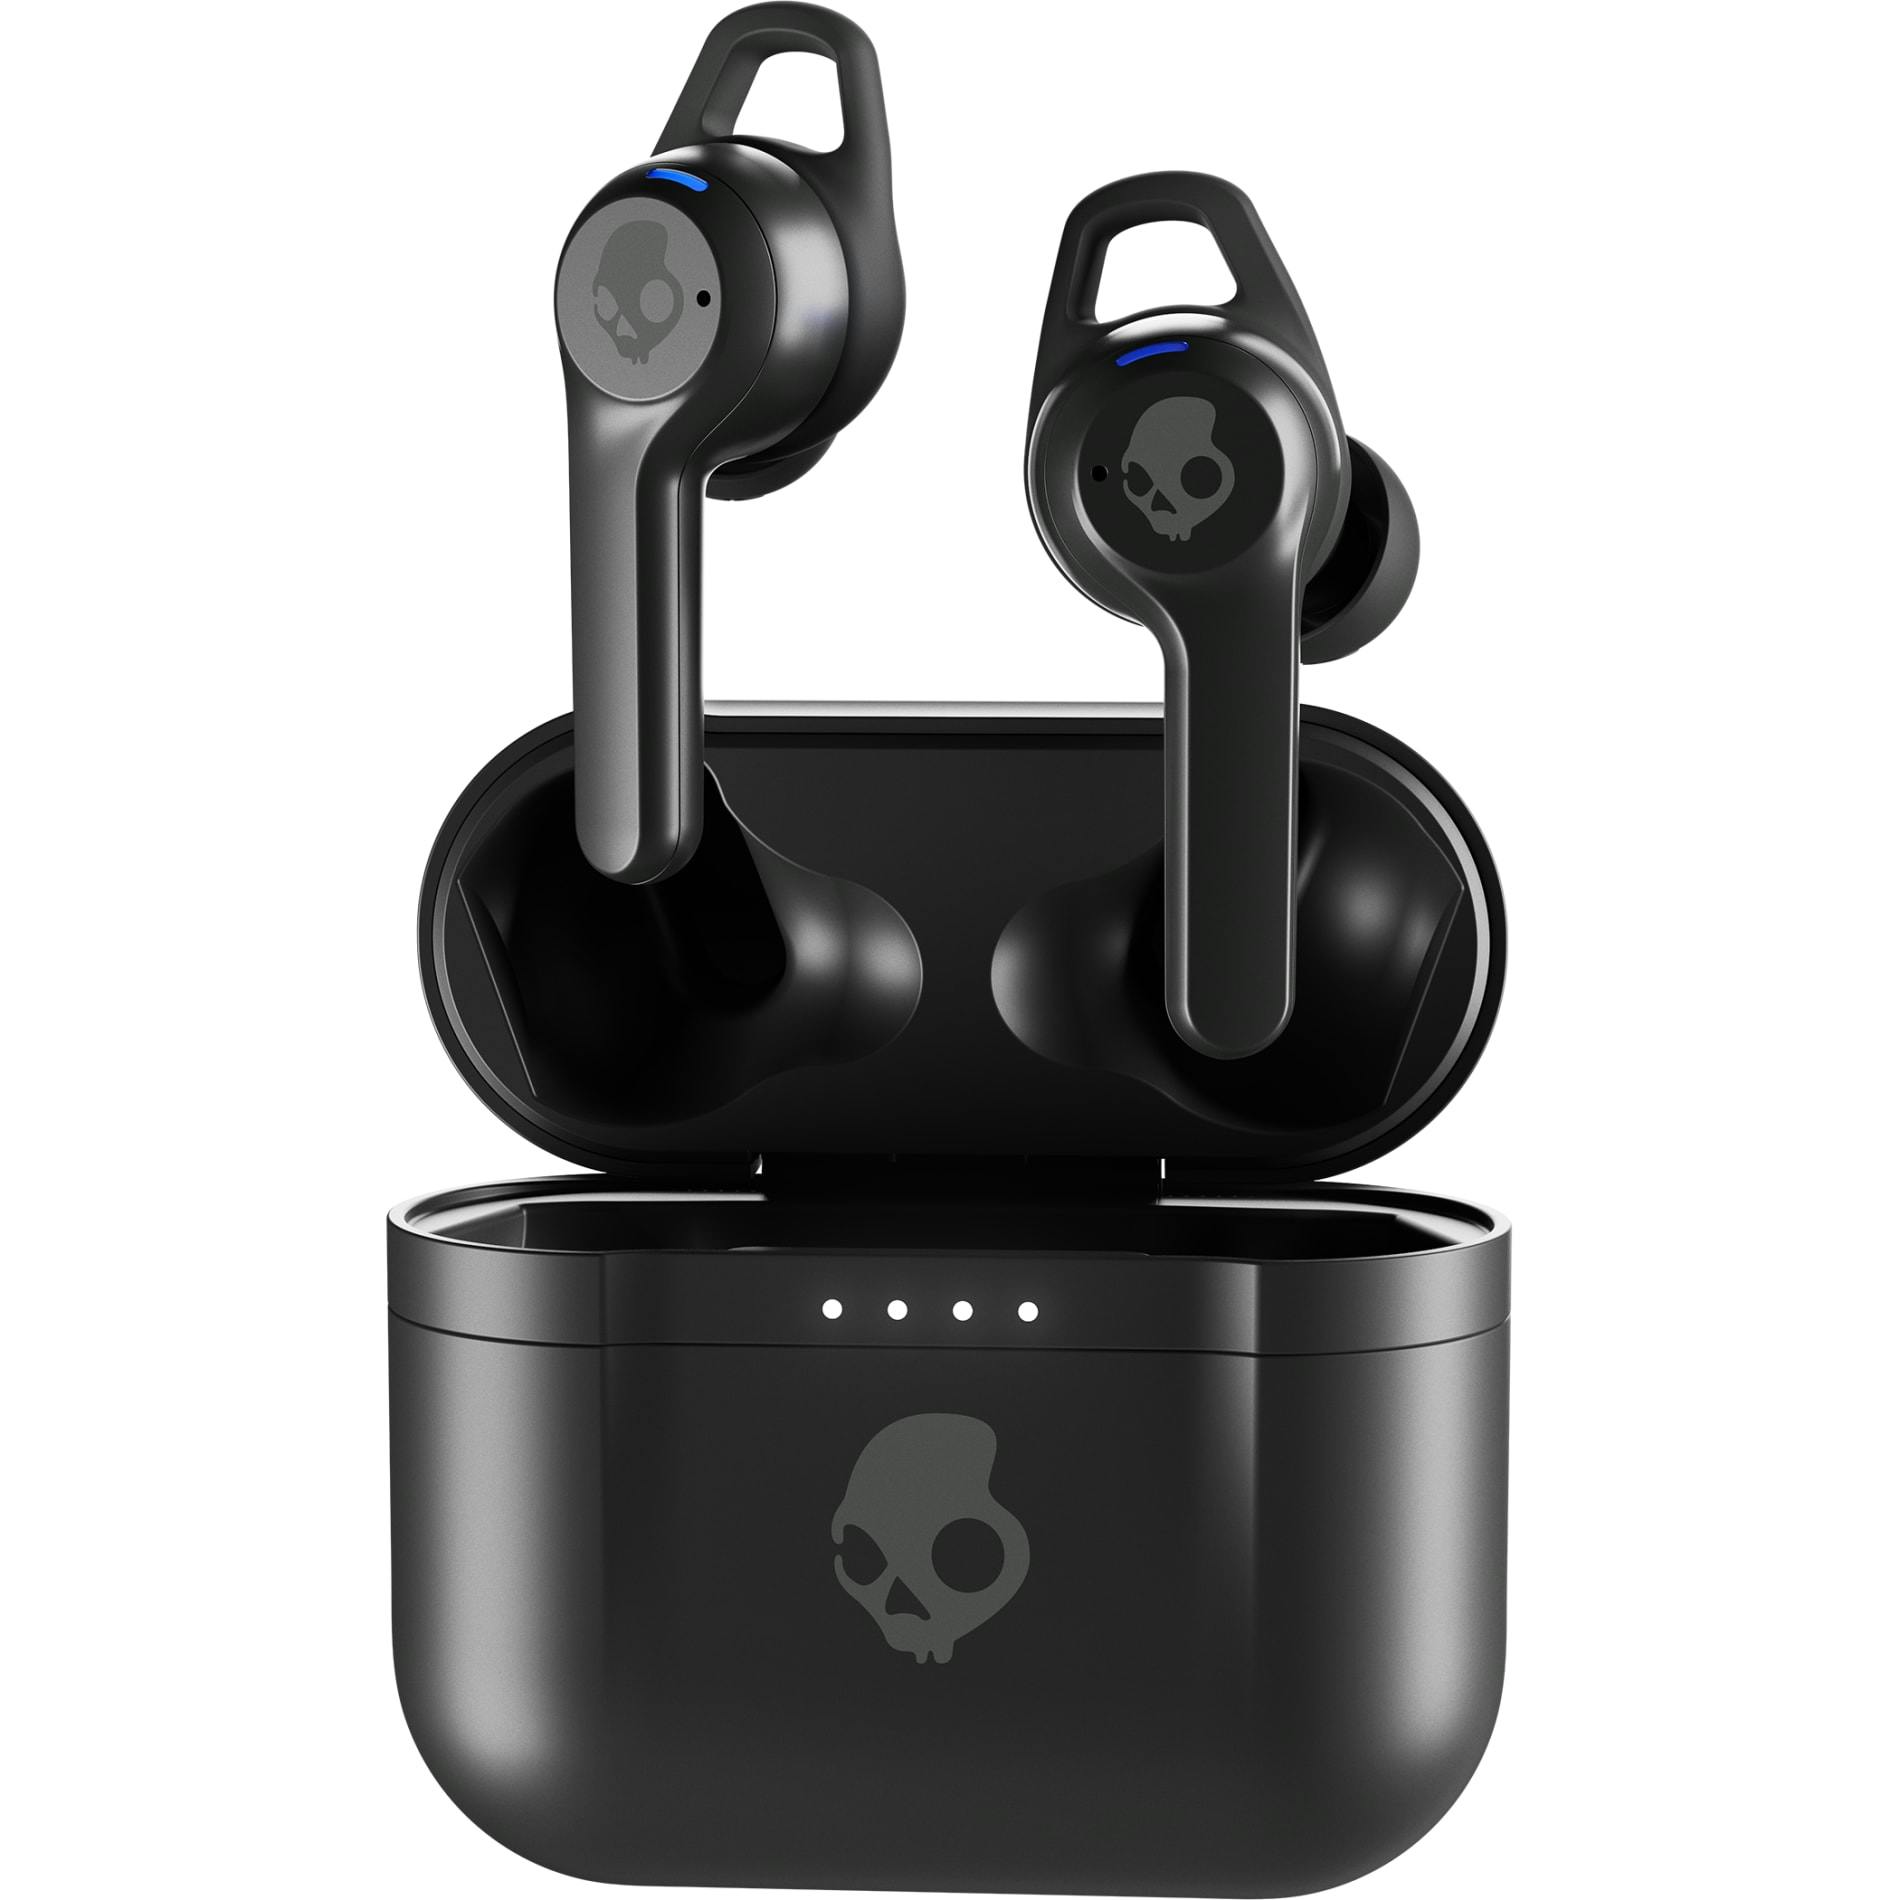 Skullcandy Indy ANC True Wireless Earbuds - additional Image 4